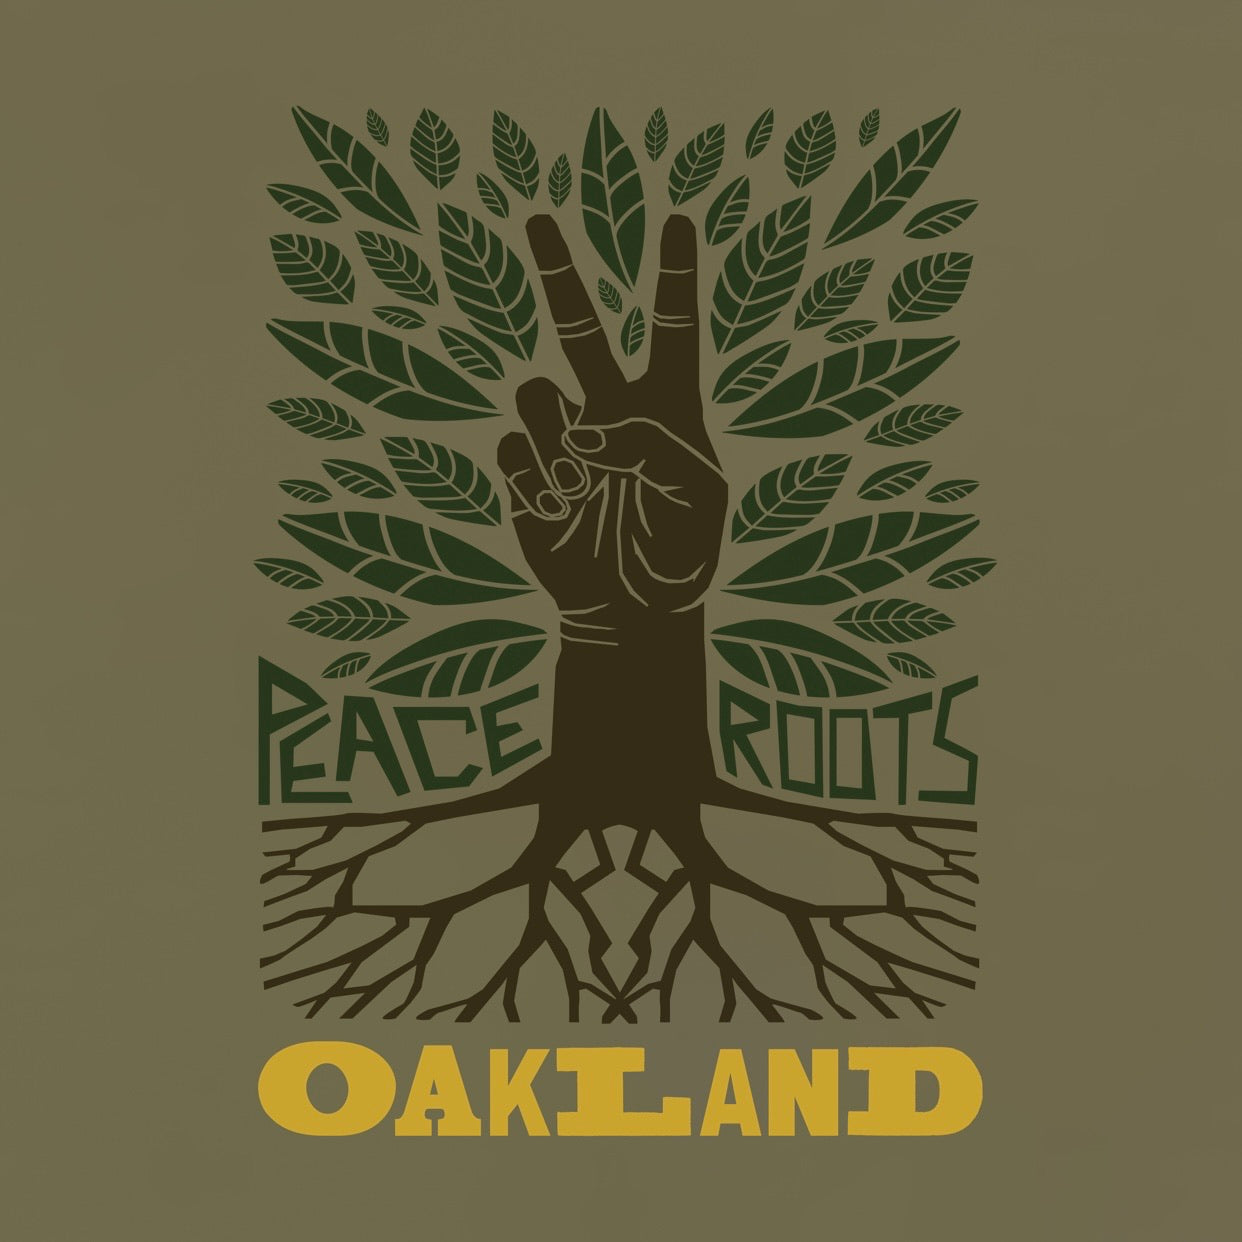 (Preorder) Women's Peace and Roots Reissue